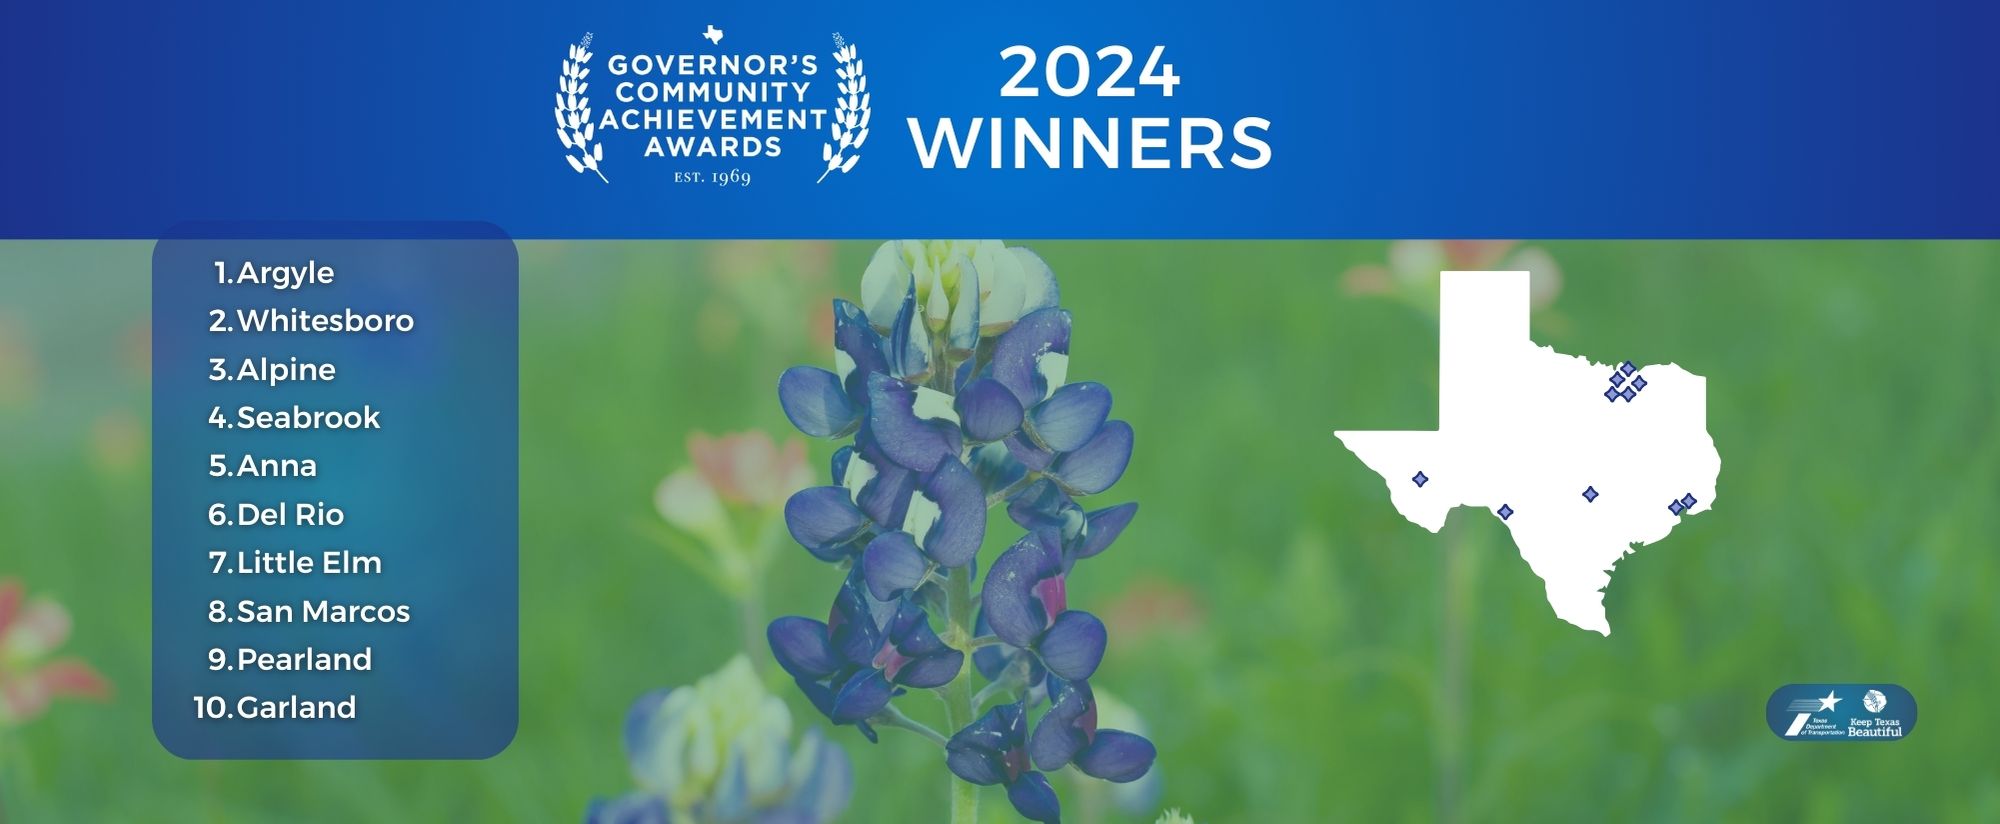 The 2024 Governor’s Community Achievement Winners